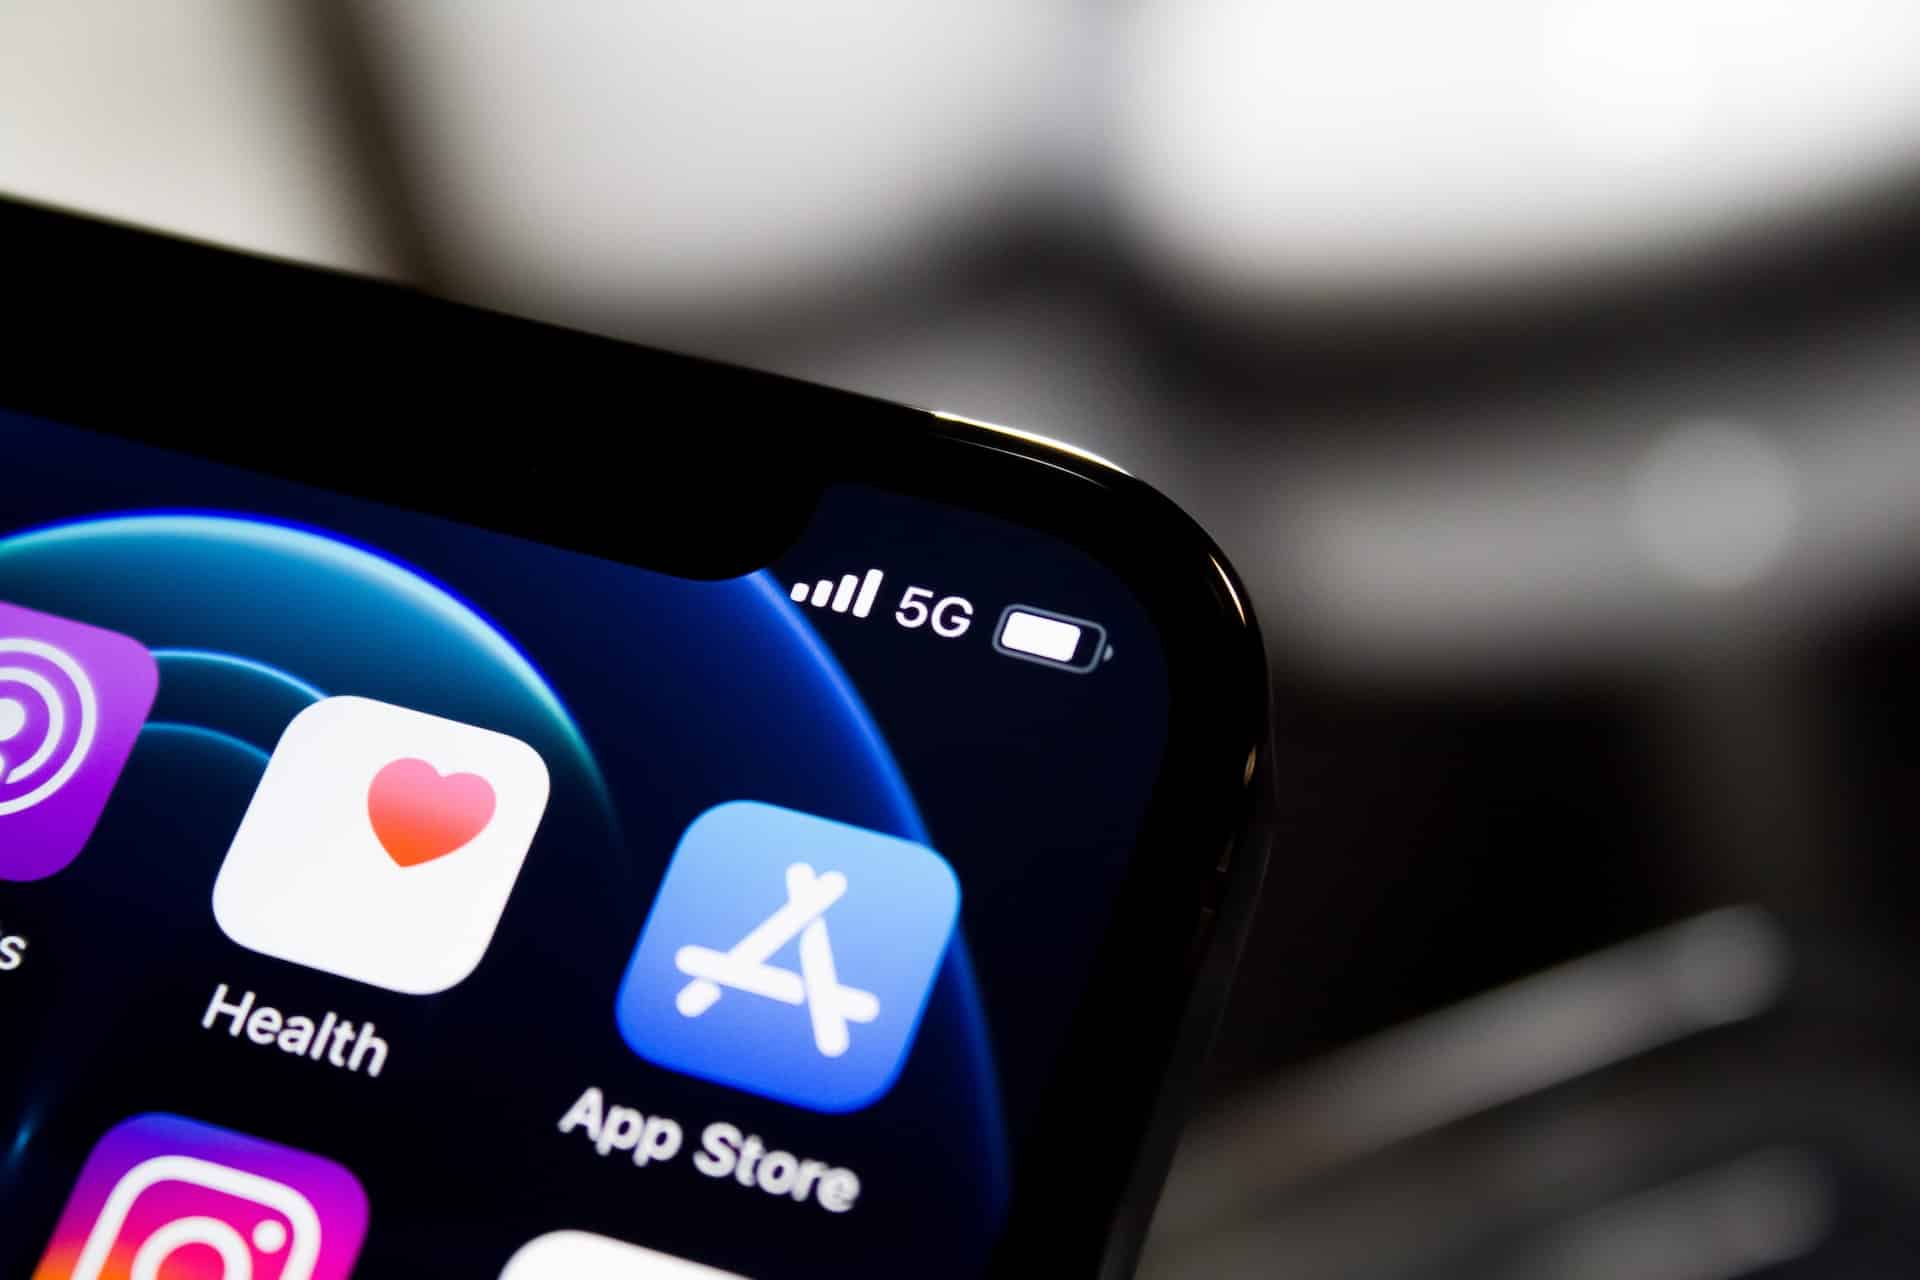 iPhone users in Europe will be able to install apps without going through Apple’s App Store in early 2024